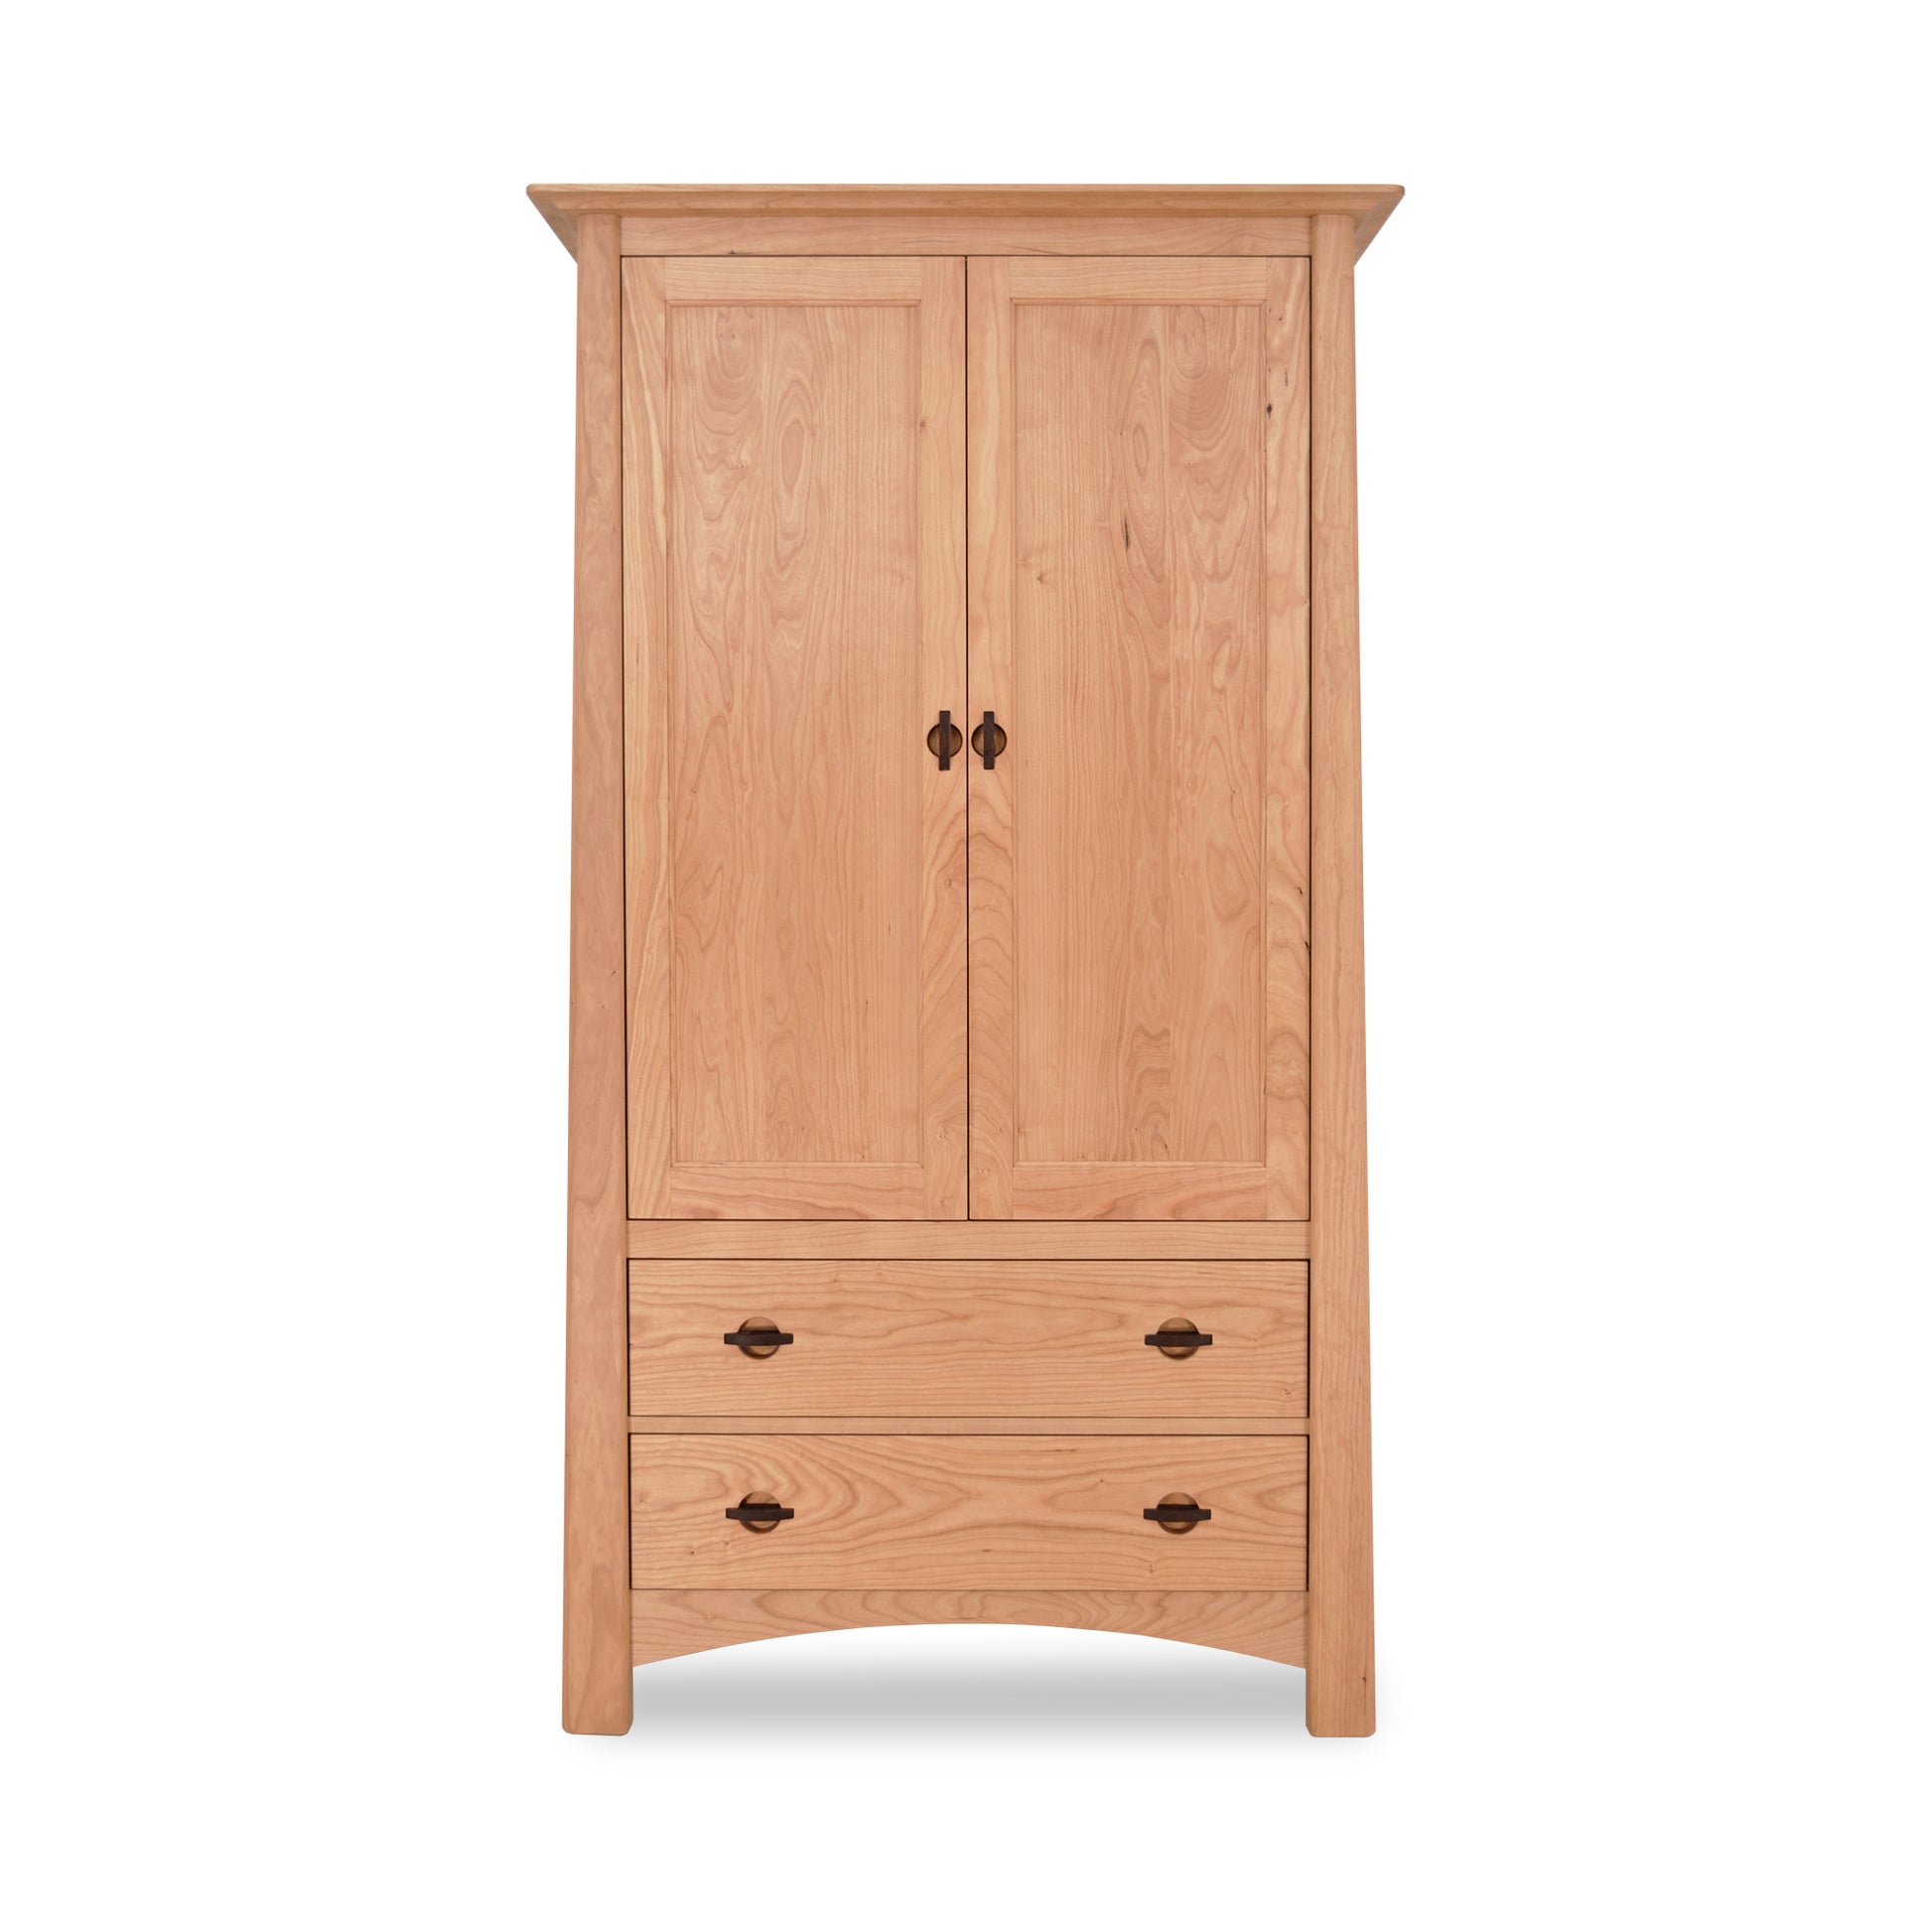 A Maple Corner Woodworks Cherry Moon Armoire with two doors and two lower drawers, featuring round handles and a plain, light wood finish. It stands against a white background.